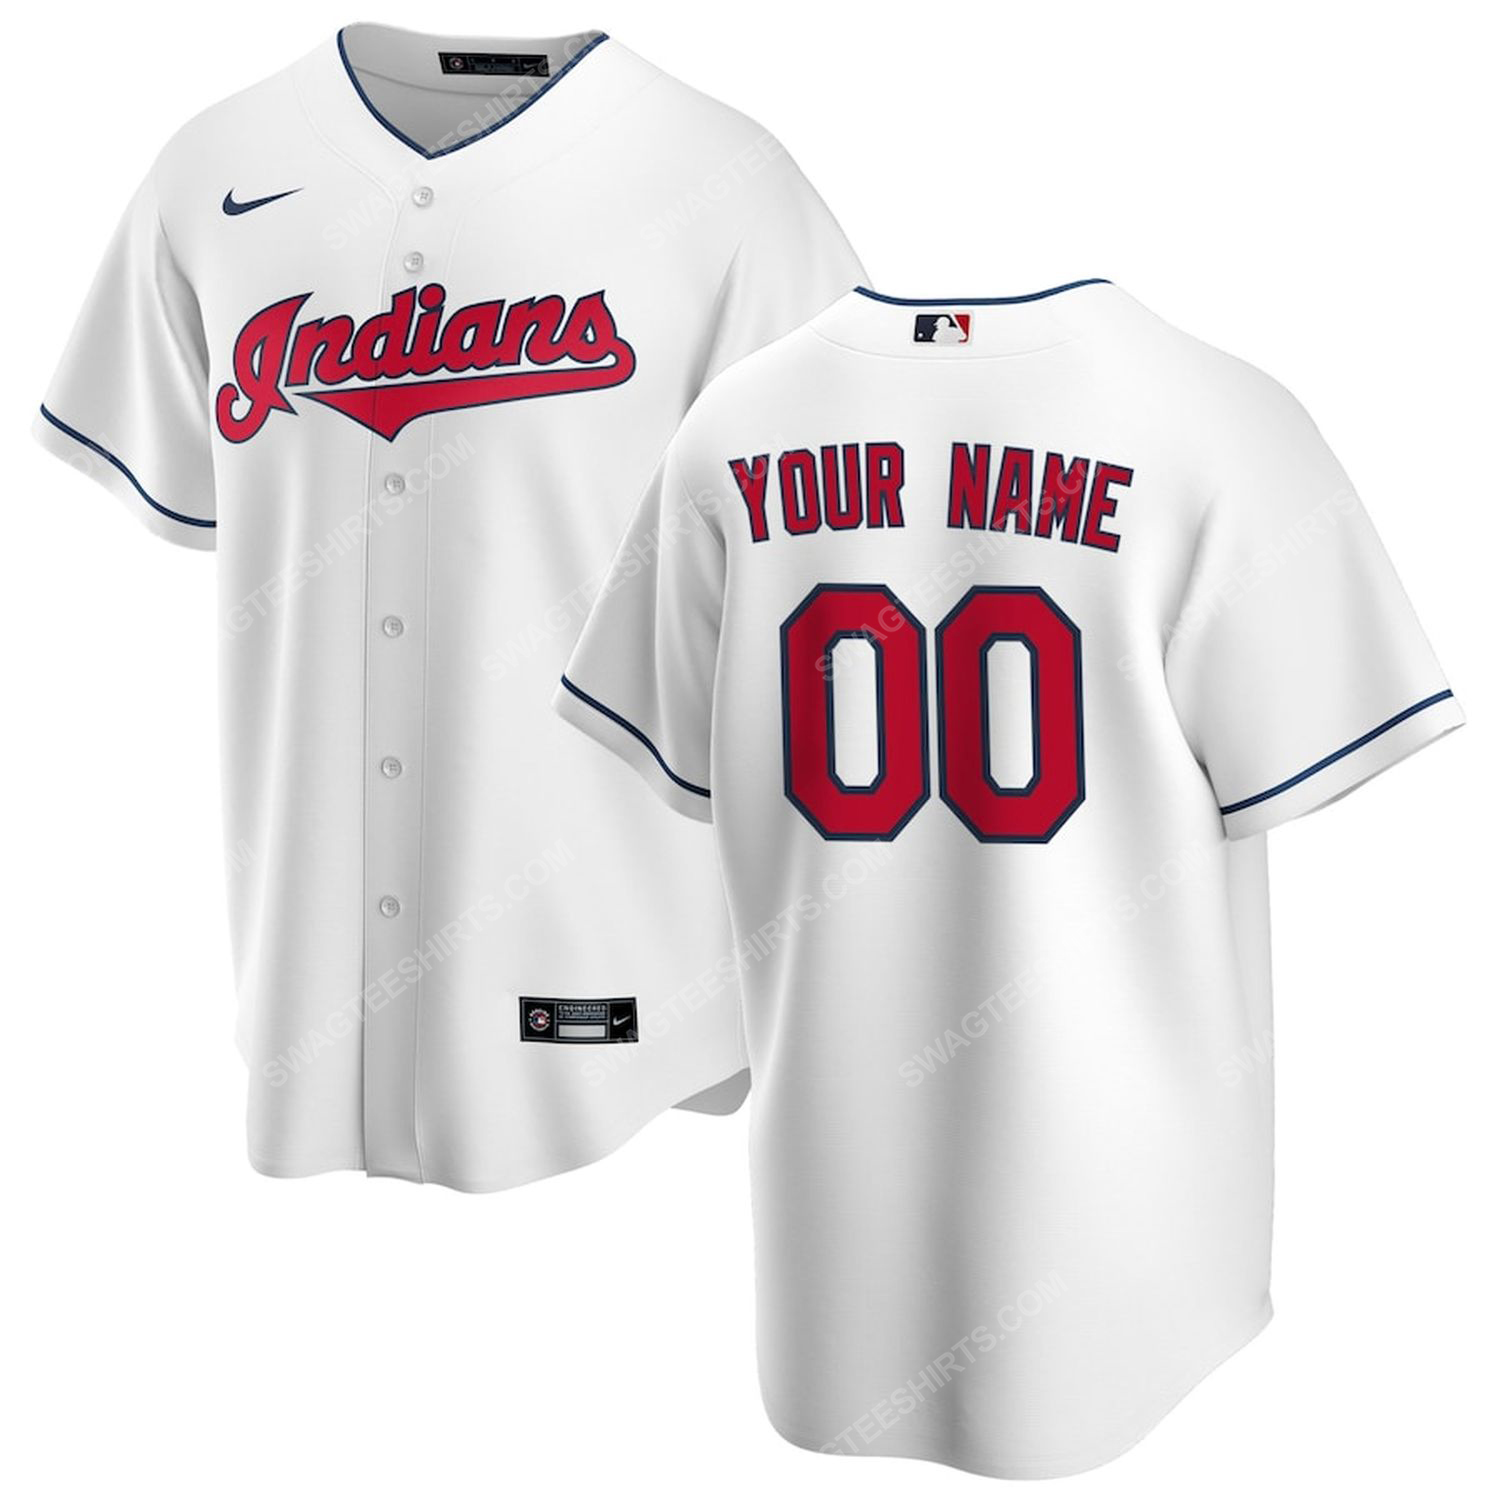 [special edition] Personalized mlb cleveland indians team baseball jersey – maria